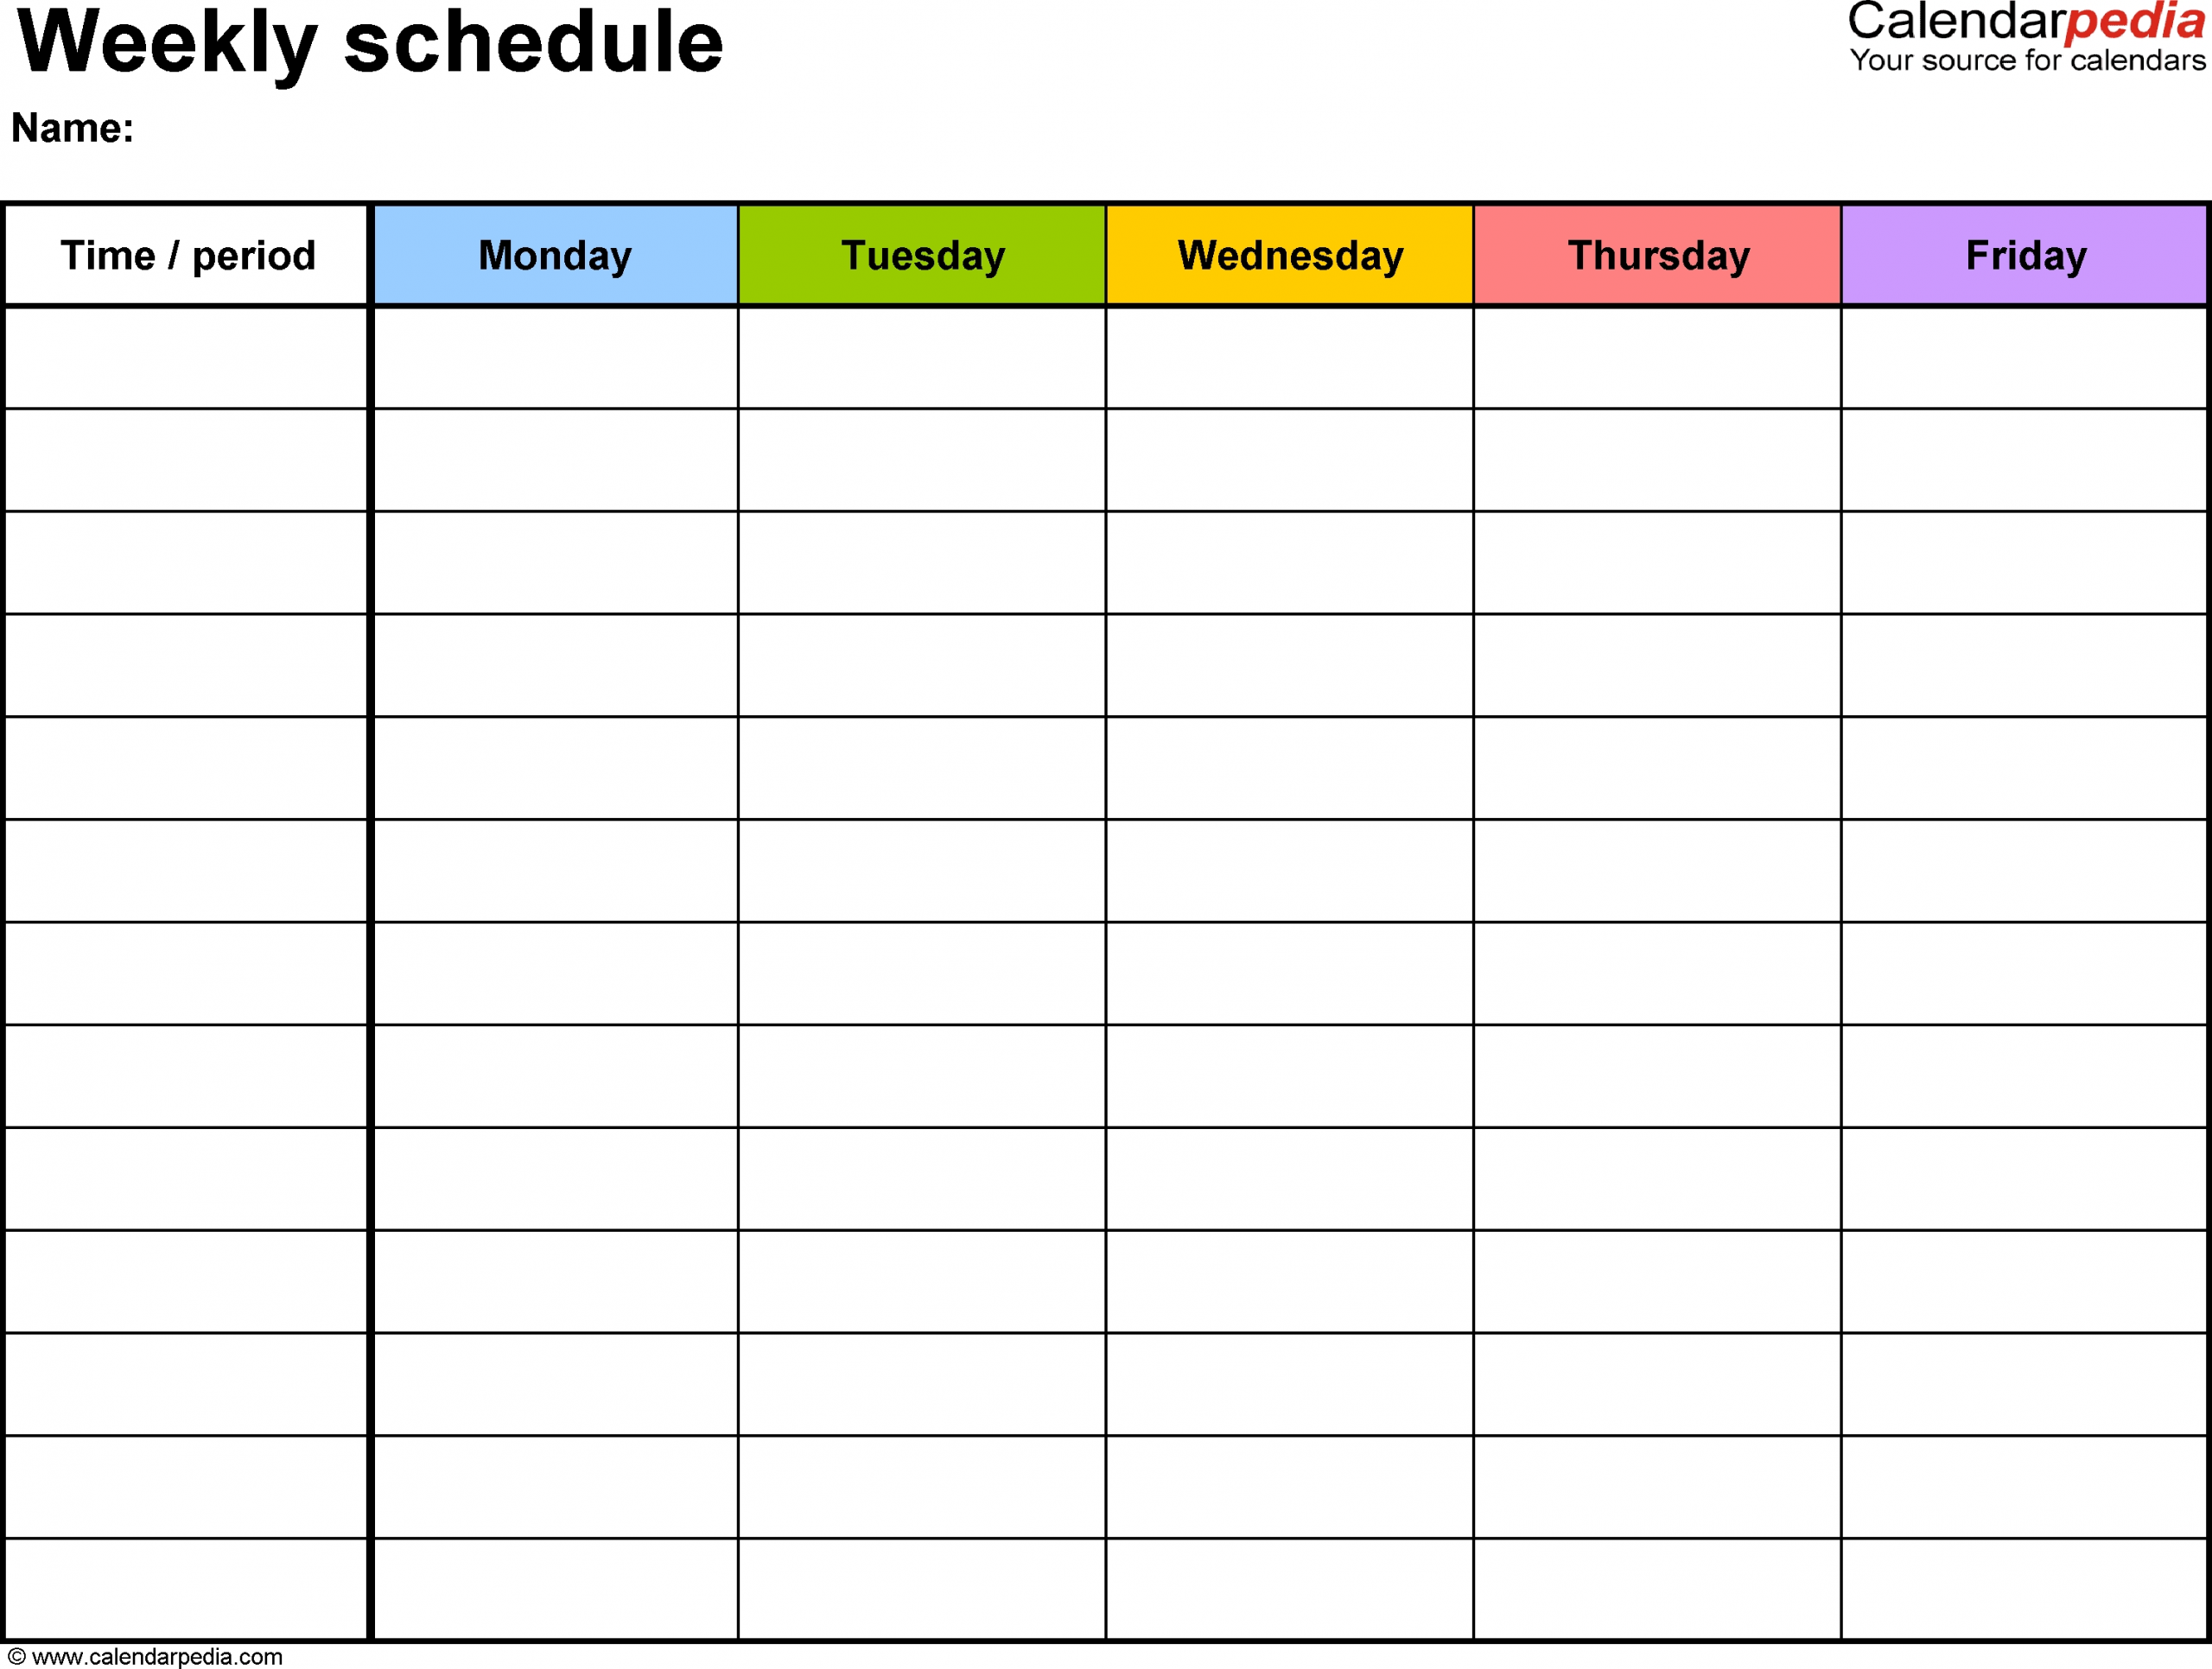 Free Weekly Schedule Templates For Excel - 18 Templates in One Week Calendar Template Printable